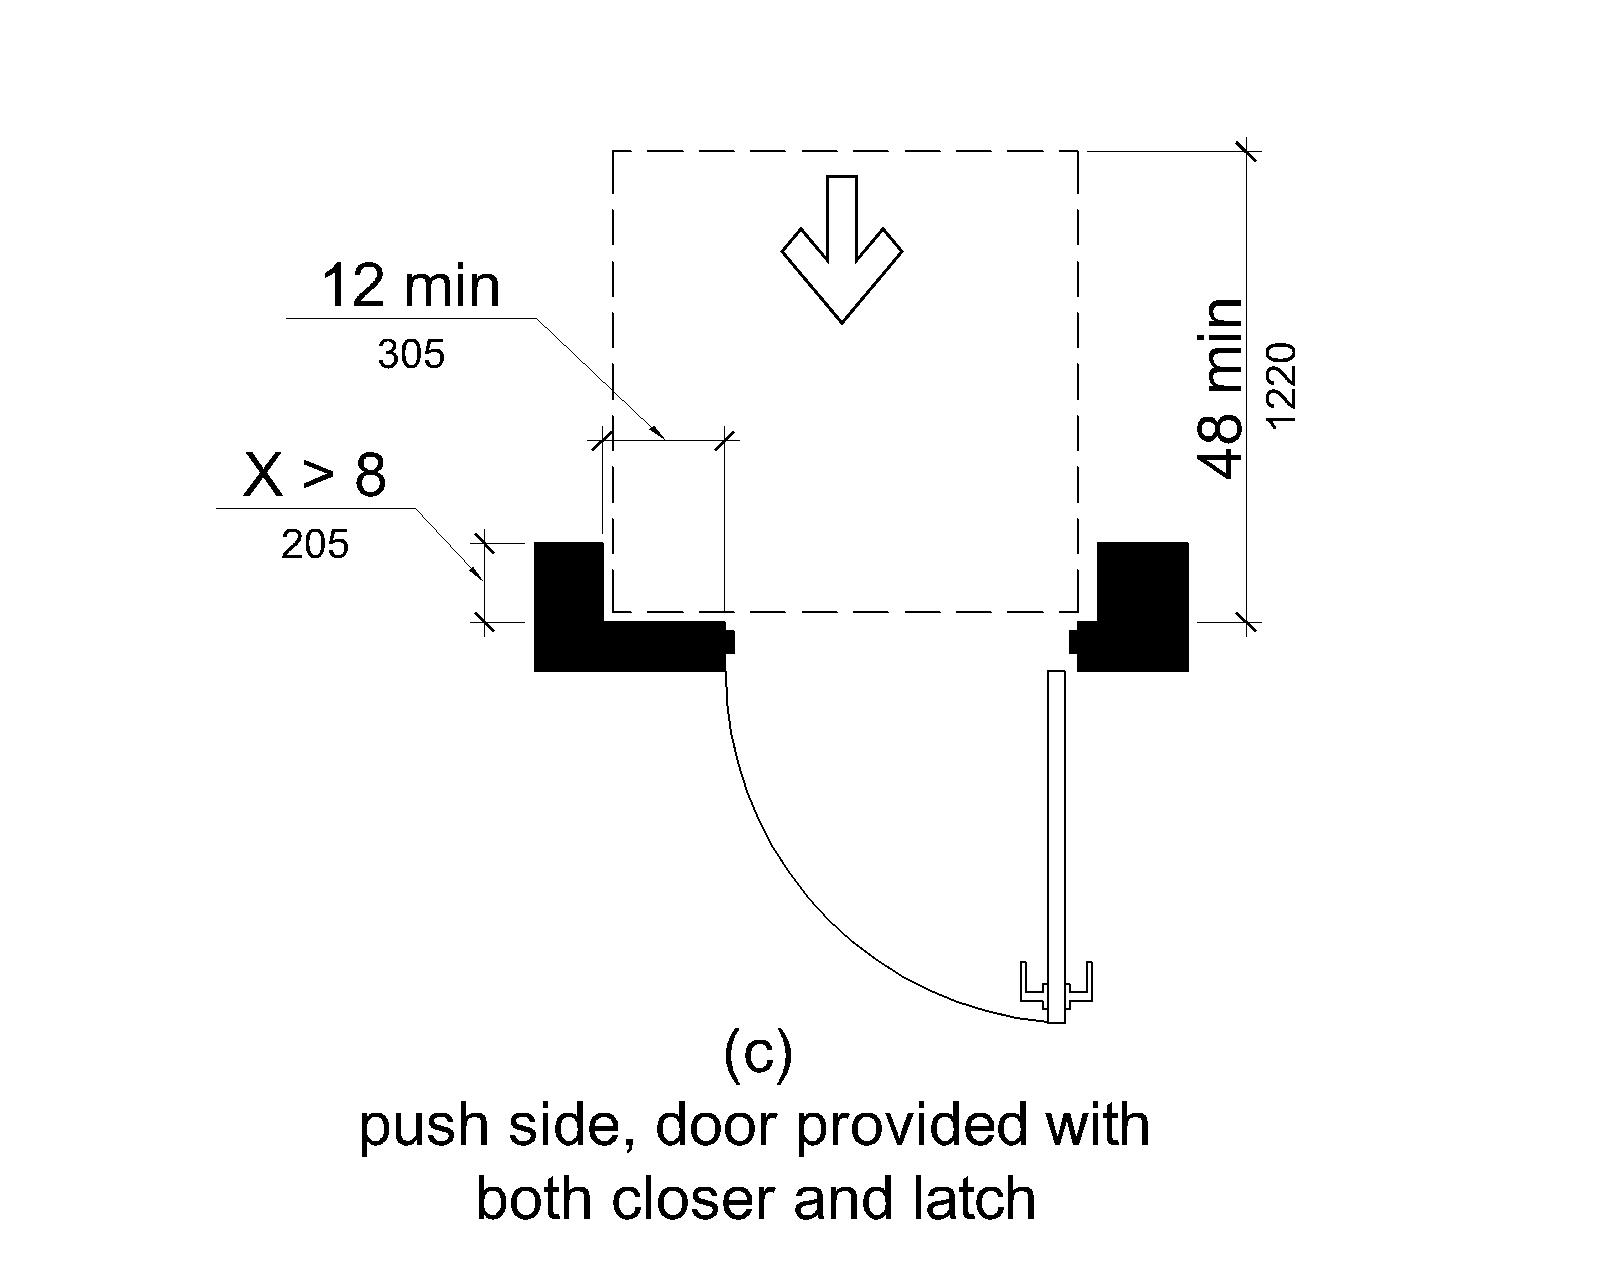 (c) At doors equipped with both a closer and a latch, the maneuvering space extends 12 inches (305 mm) minimum beyond the latch side of the door and 48 inches (1220 mm) minimum measured perpendicular to the plane of the doorway.